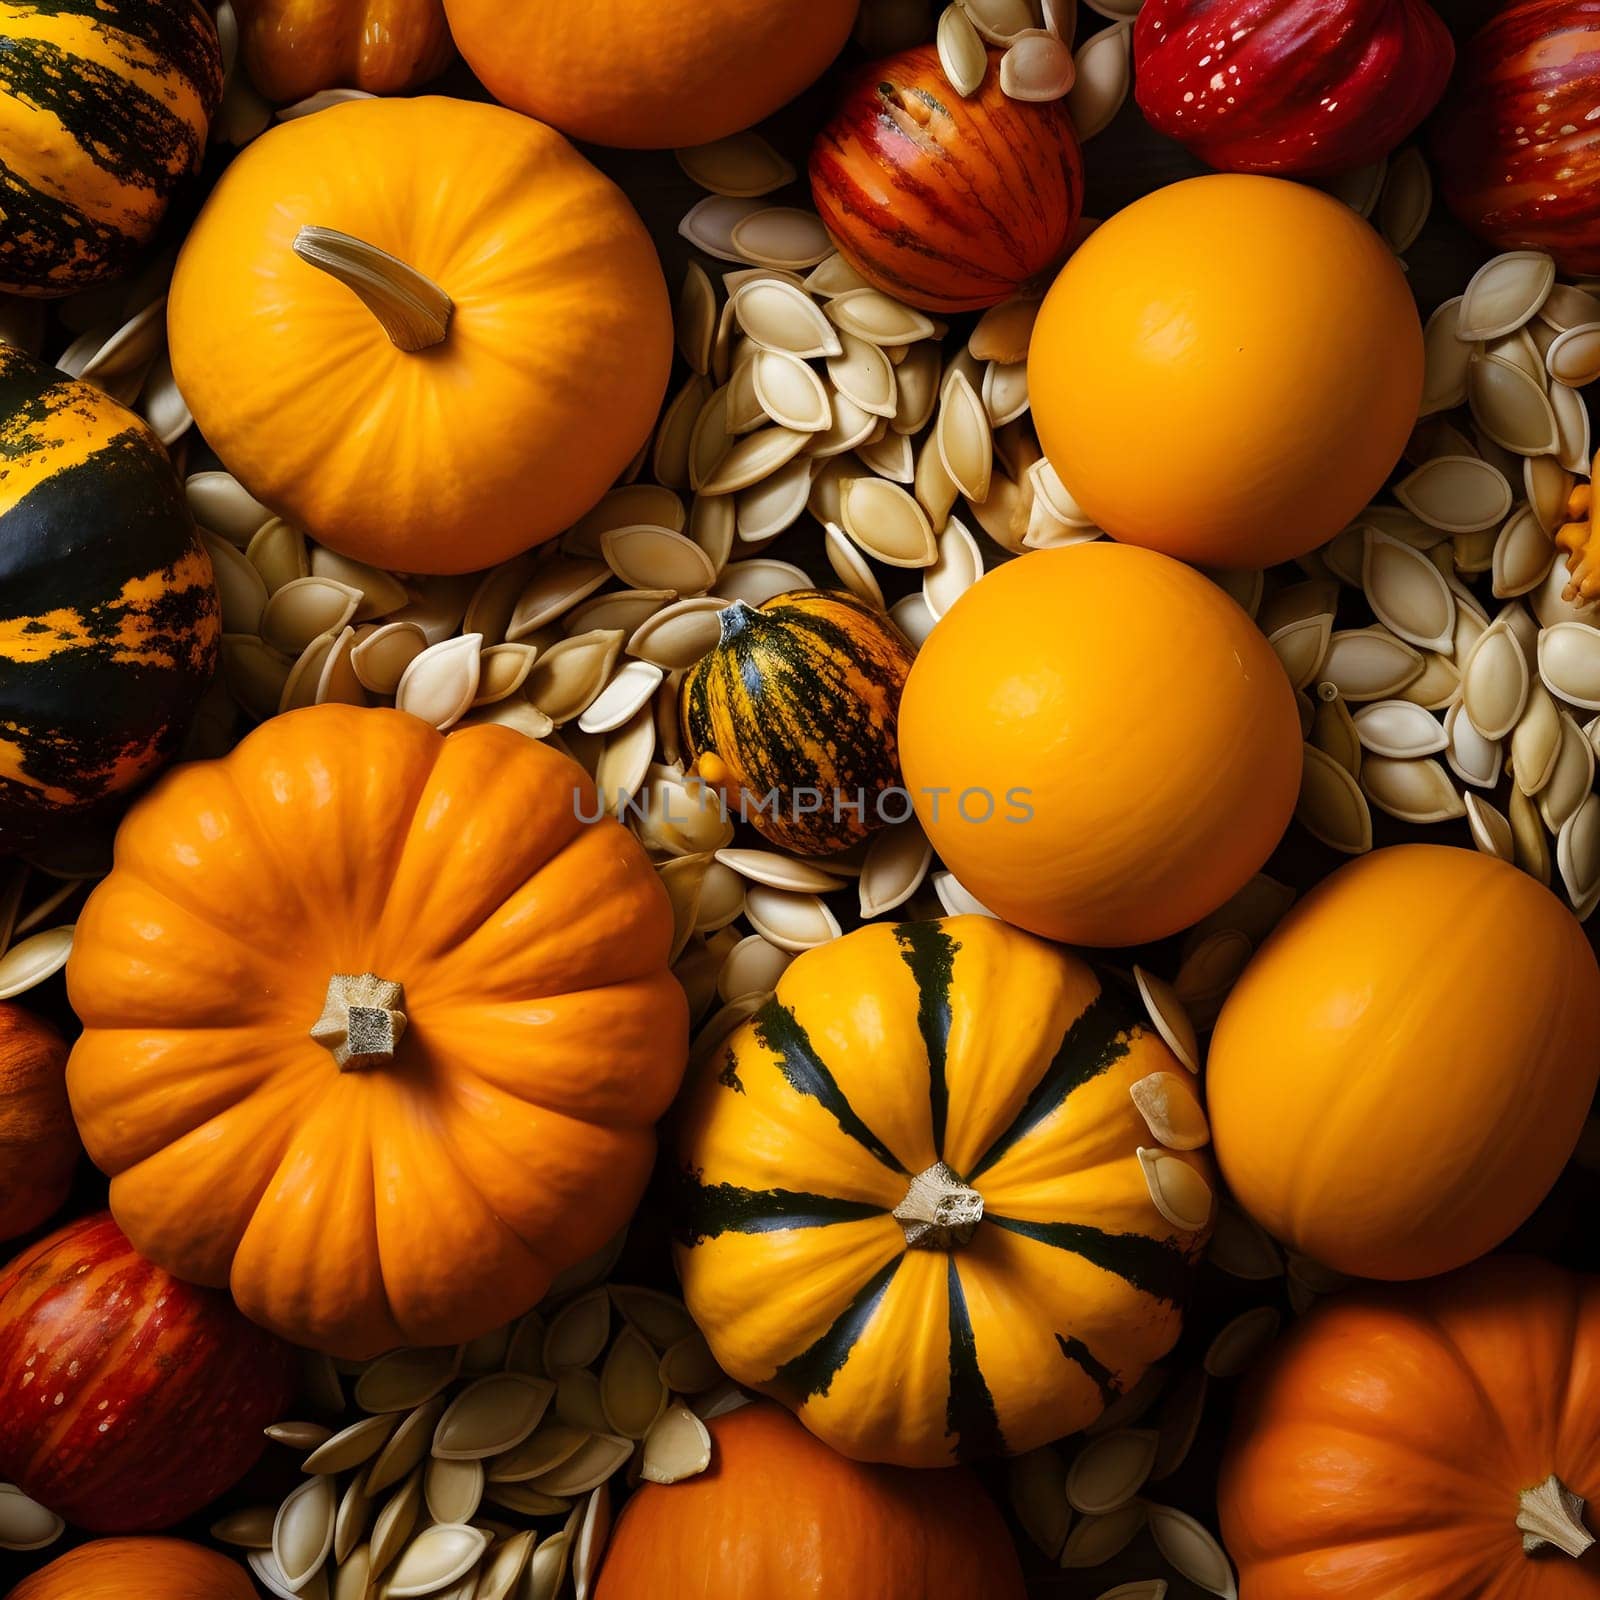 An aerial view of scattered seeds, pumpkins and other fruits and vegetables. Pumpkin as a dish of thanksgiving for the harvest. An atmosphere of joy and celebration.